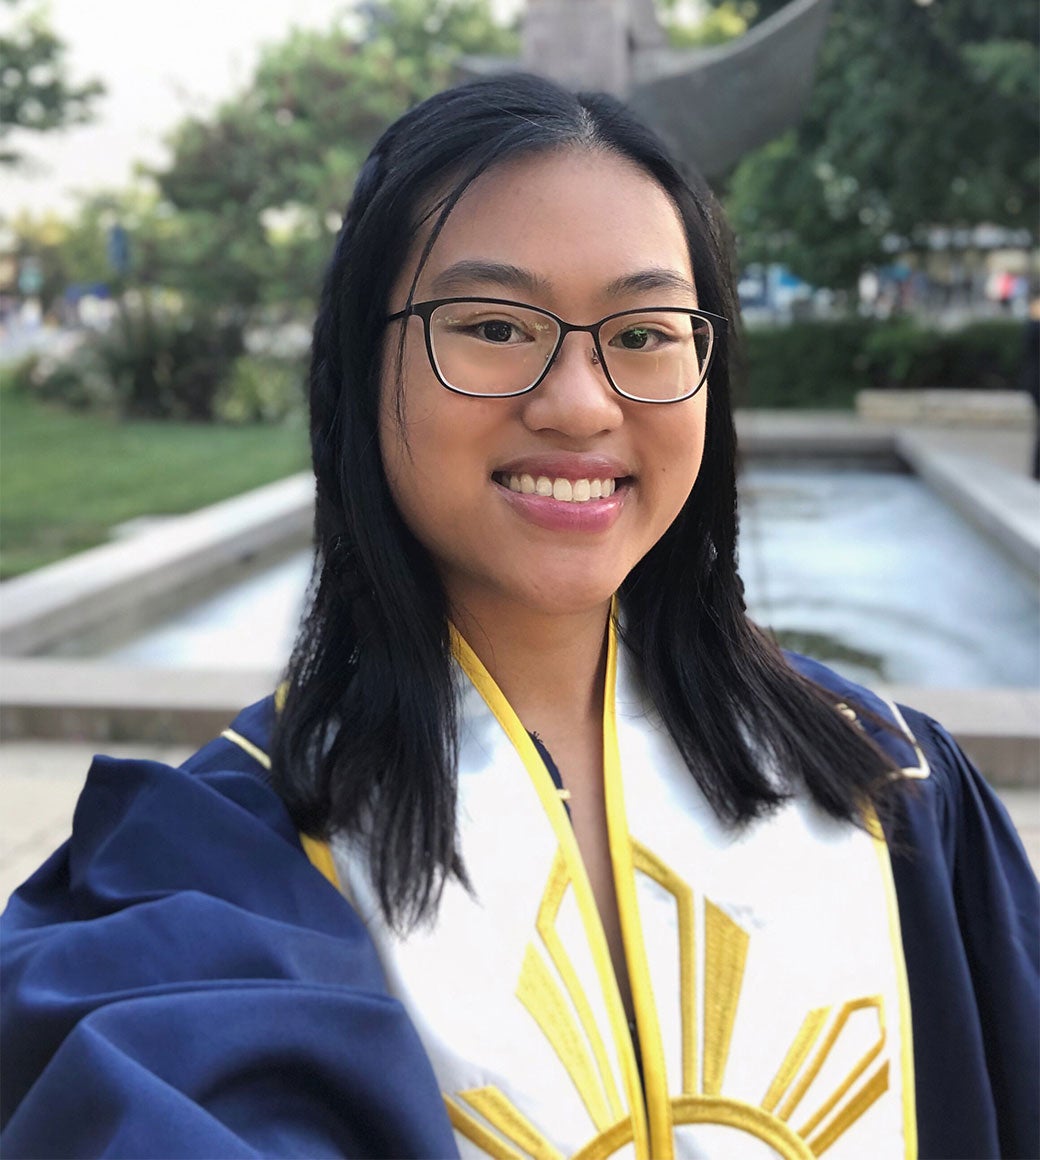 Ellaine Arroyo, smiling and wearing glasses, poses in her graduation gown.